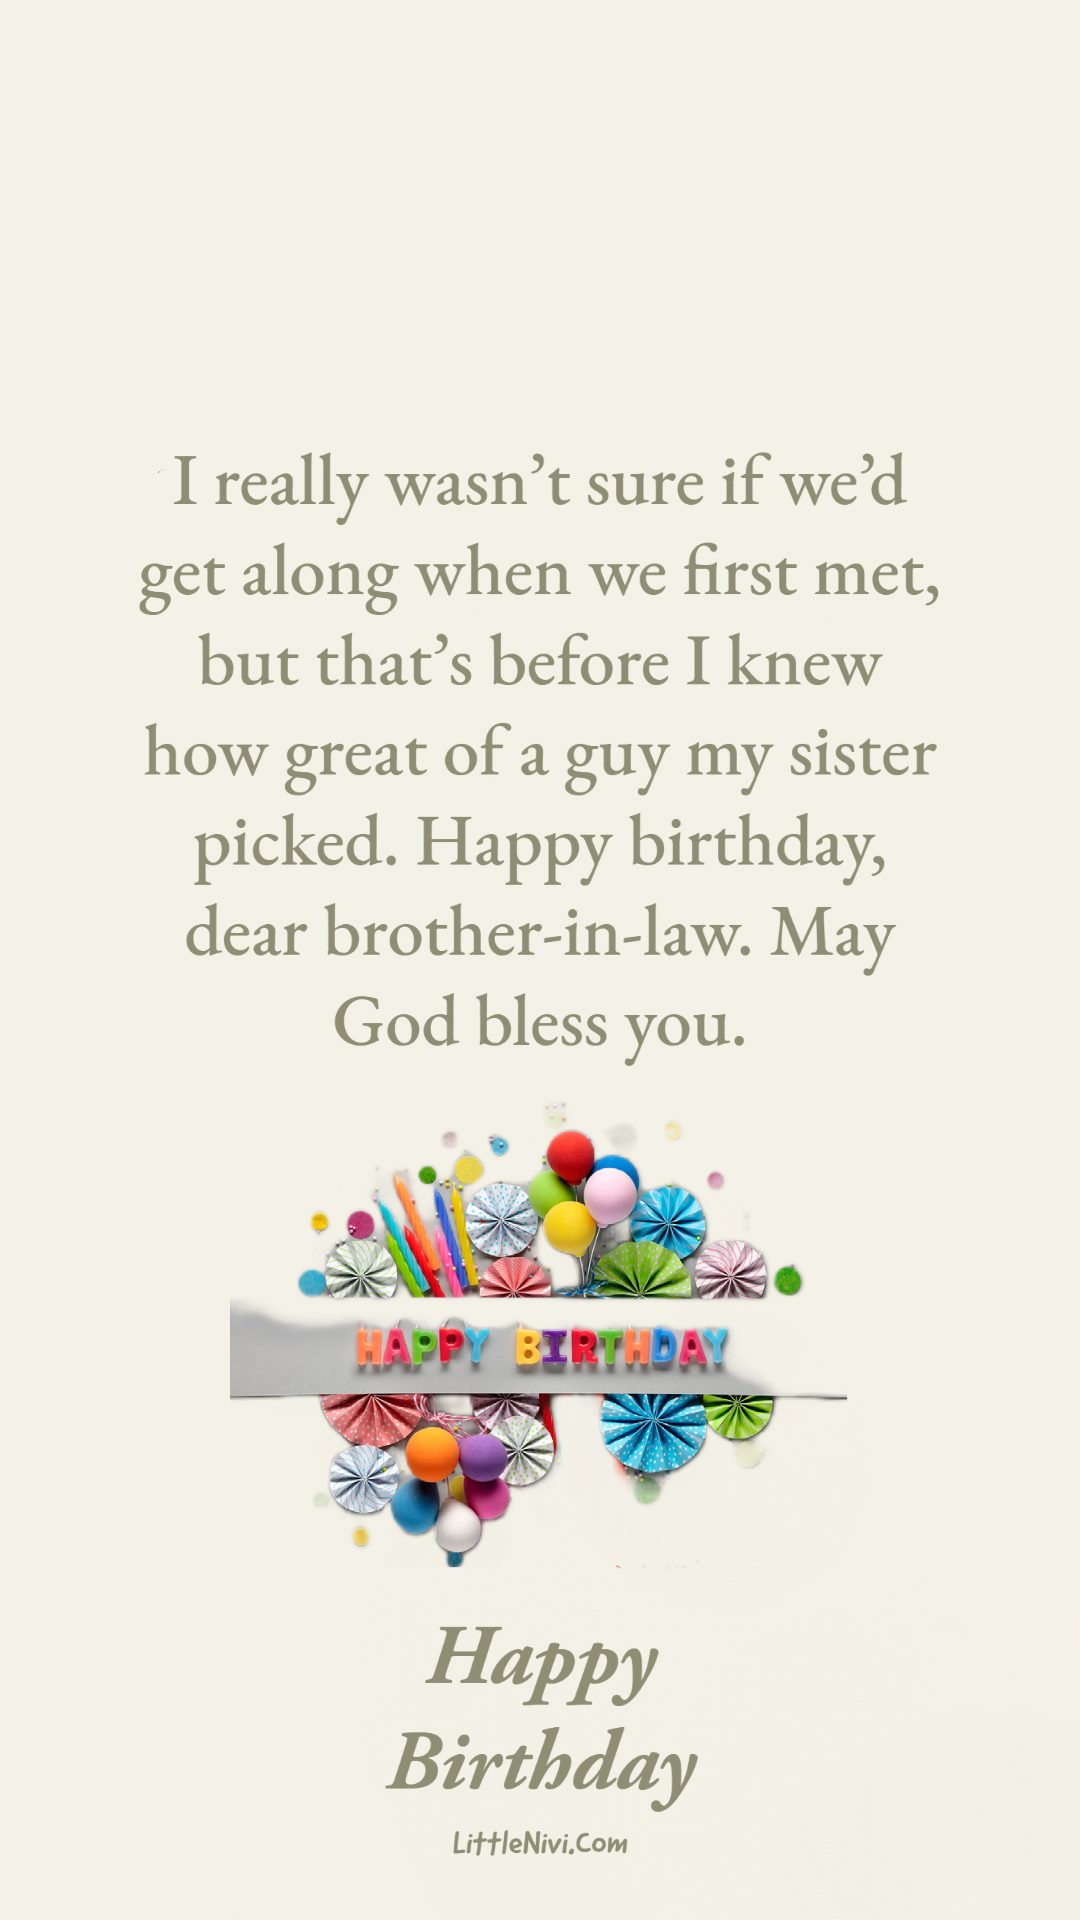 birthday cake cards for brother in law birthday greeting cards